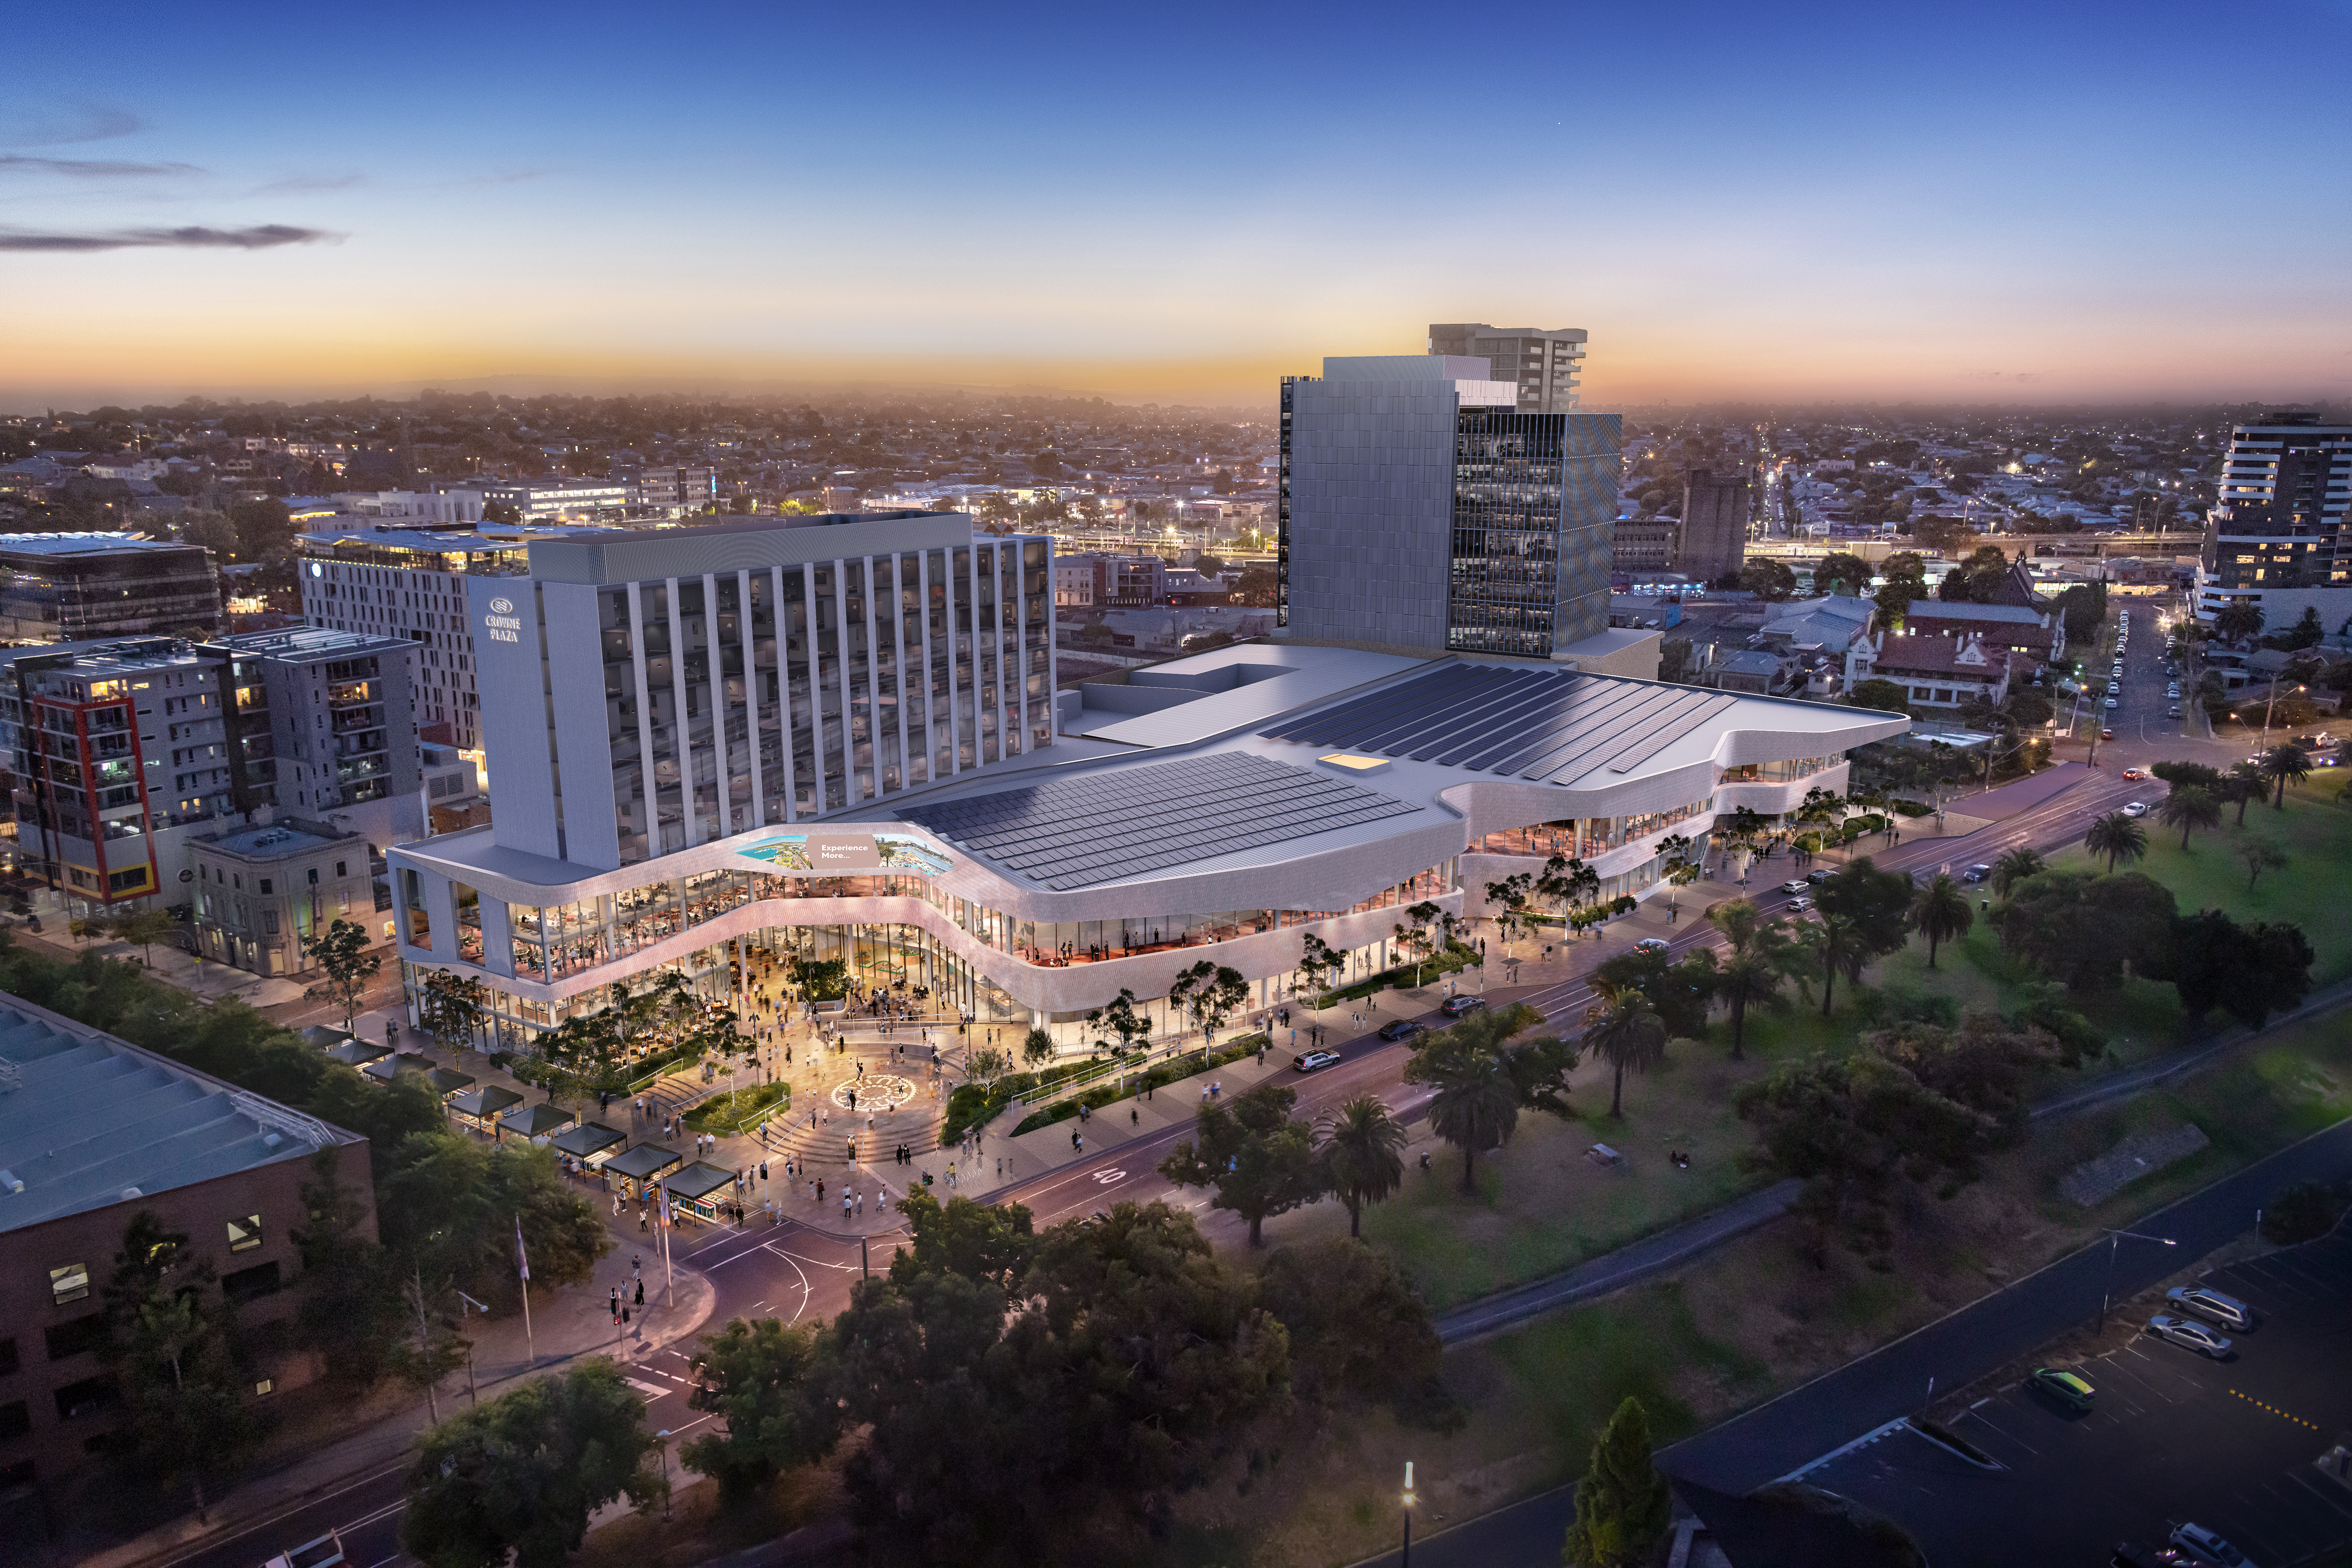 Artist impression of the Geelong Convention and Event Centre aerial view